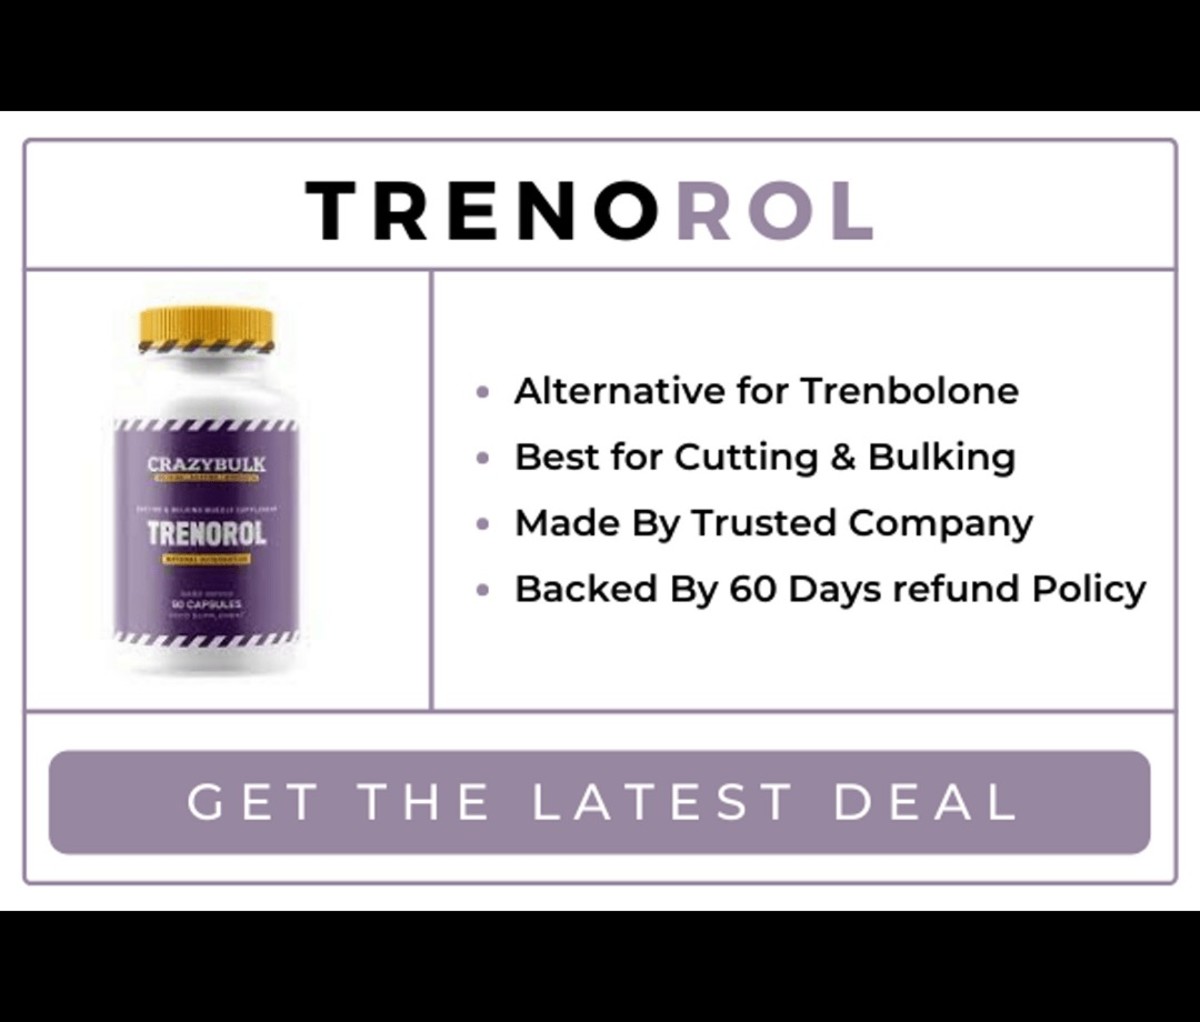 Trenorol Review: Brand Overview